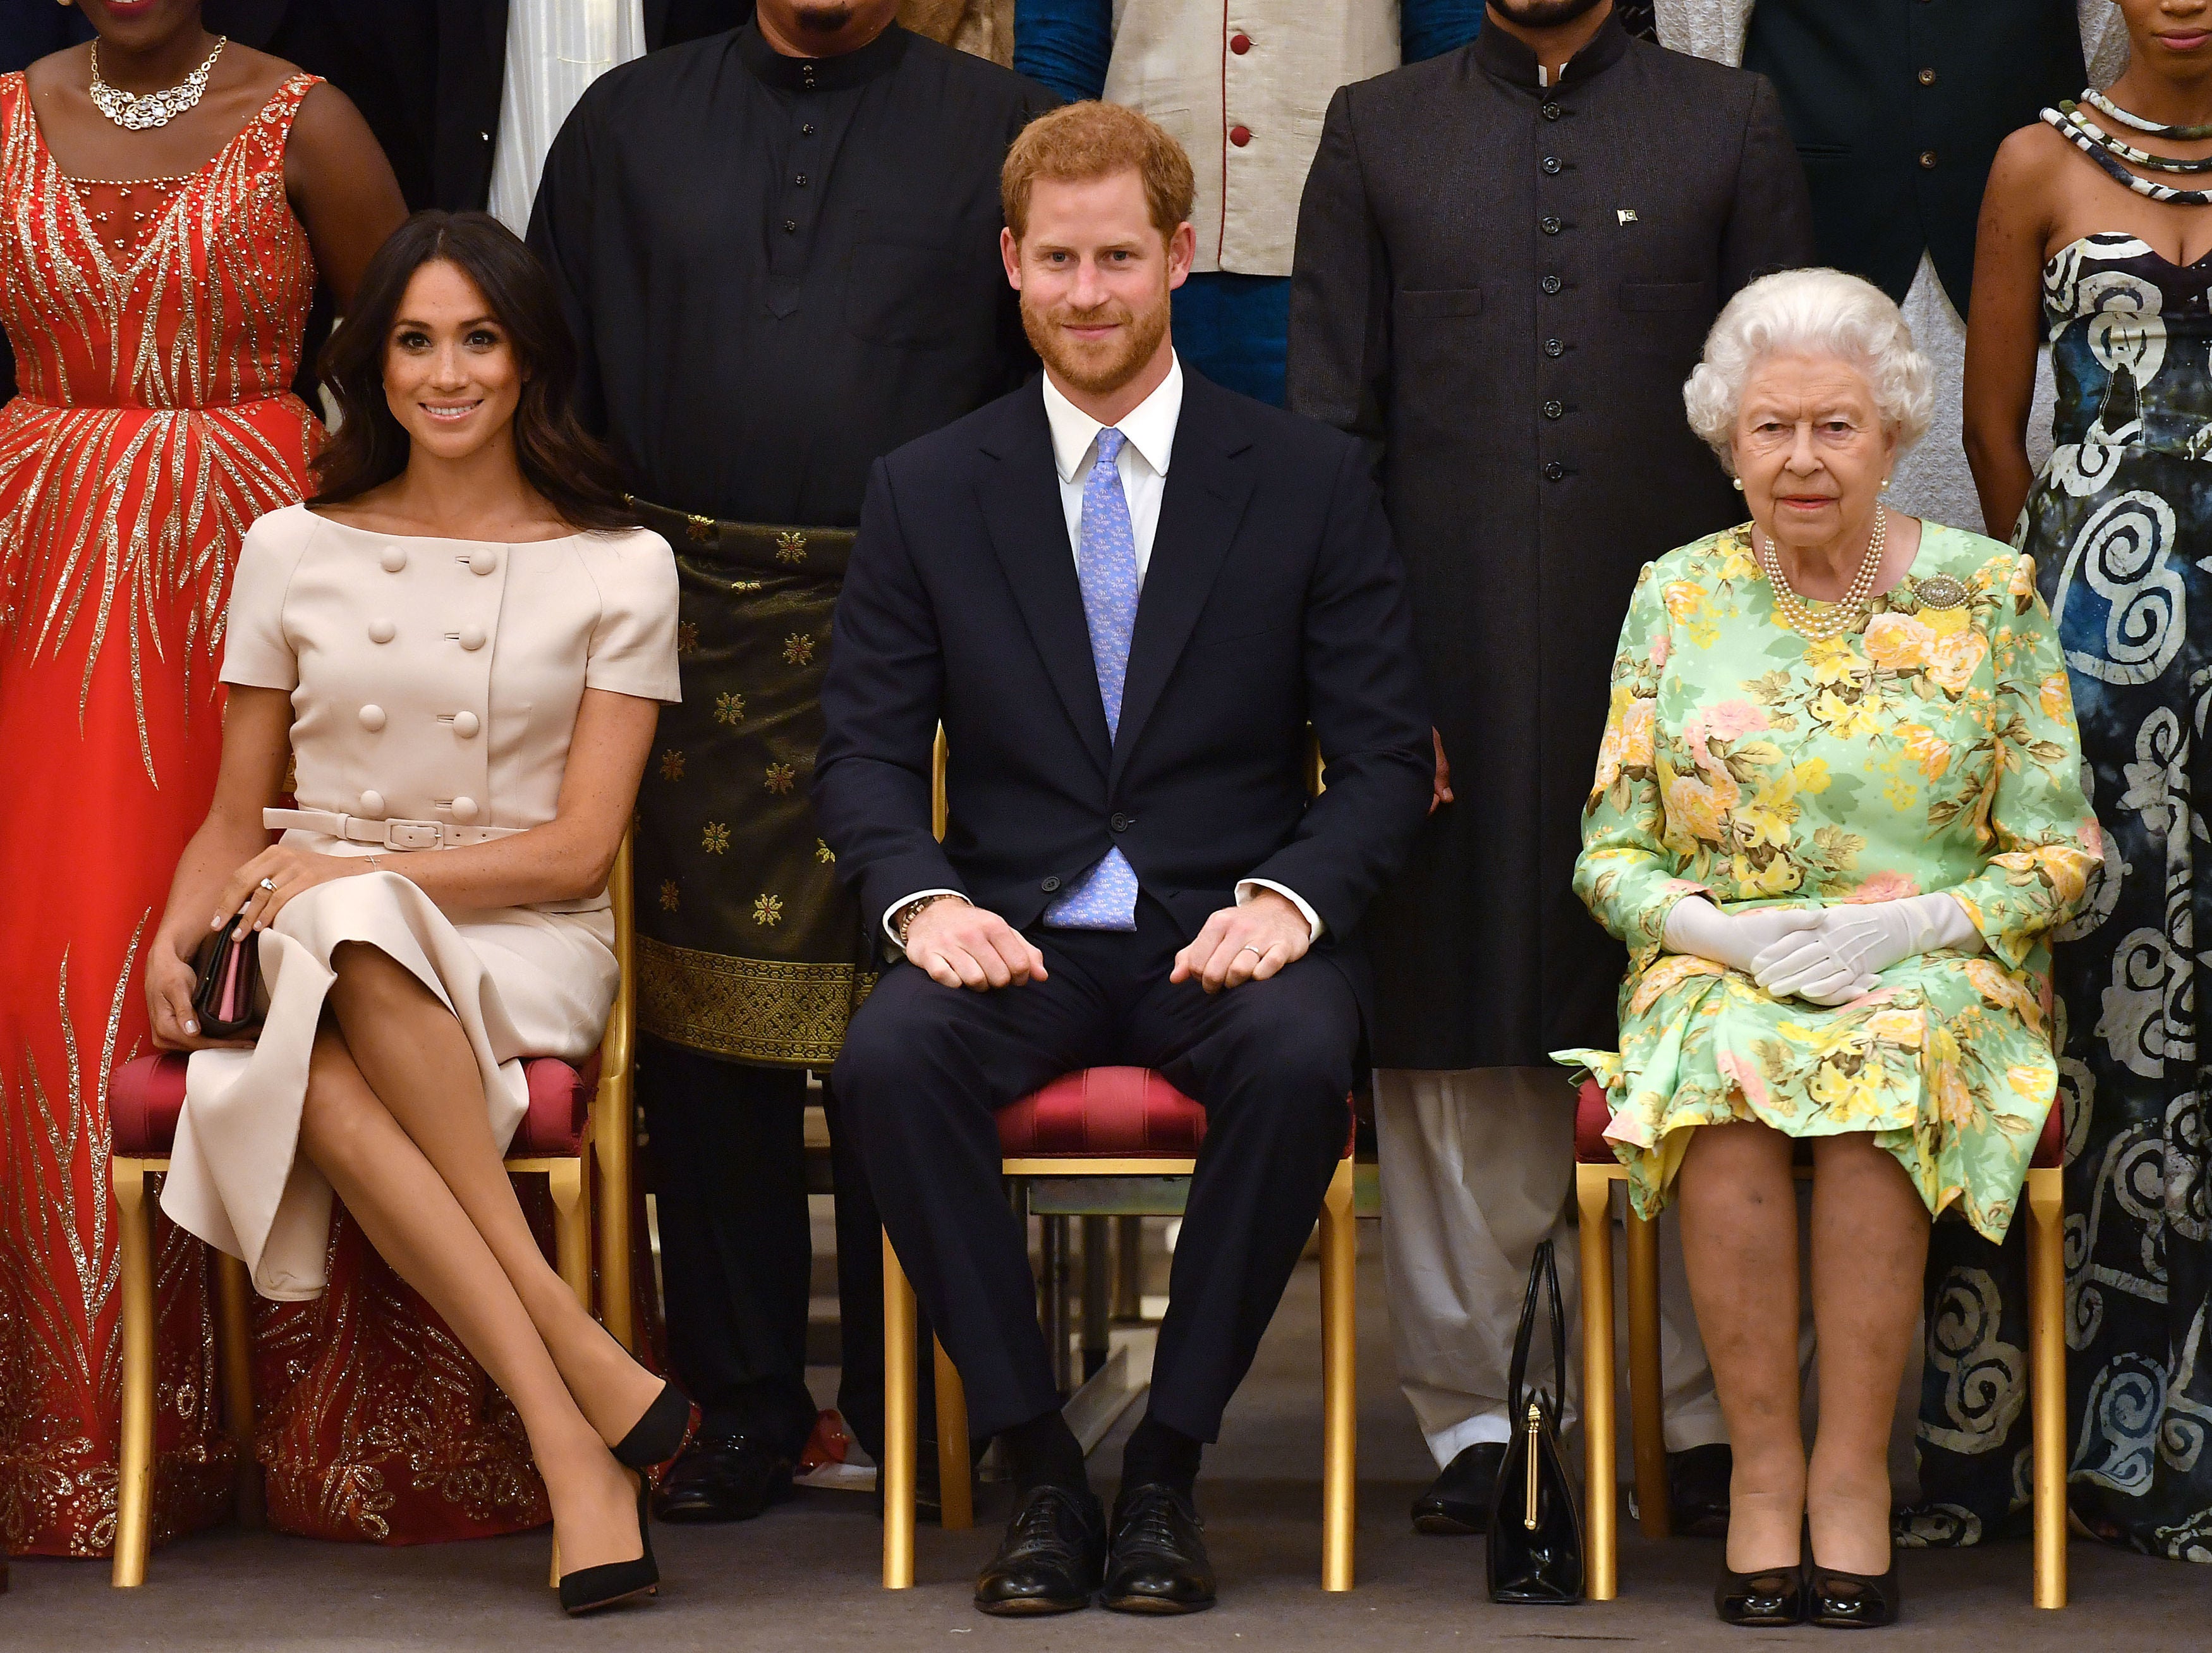 The Duke and Duchess of Sussex’s surprise visit to the Queen and the Prince of Wales has been viewed as an ‘olive branch’ by royal commentators (John Stillwell/PA)